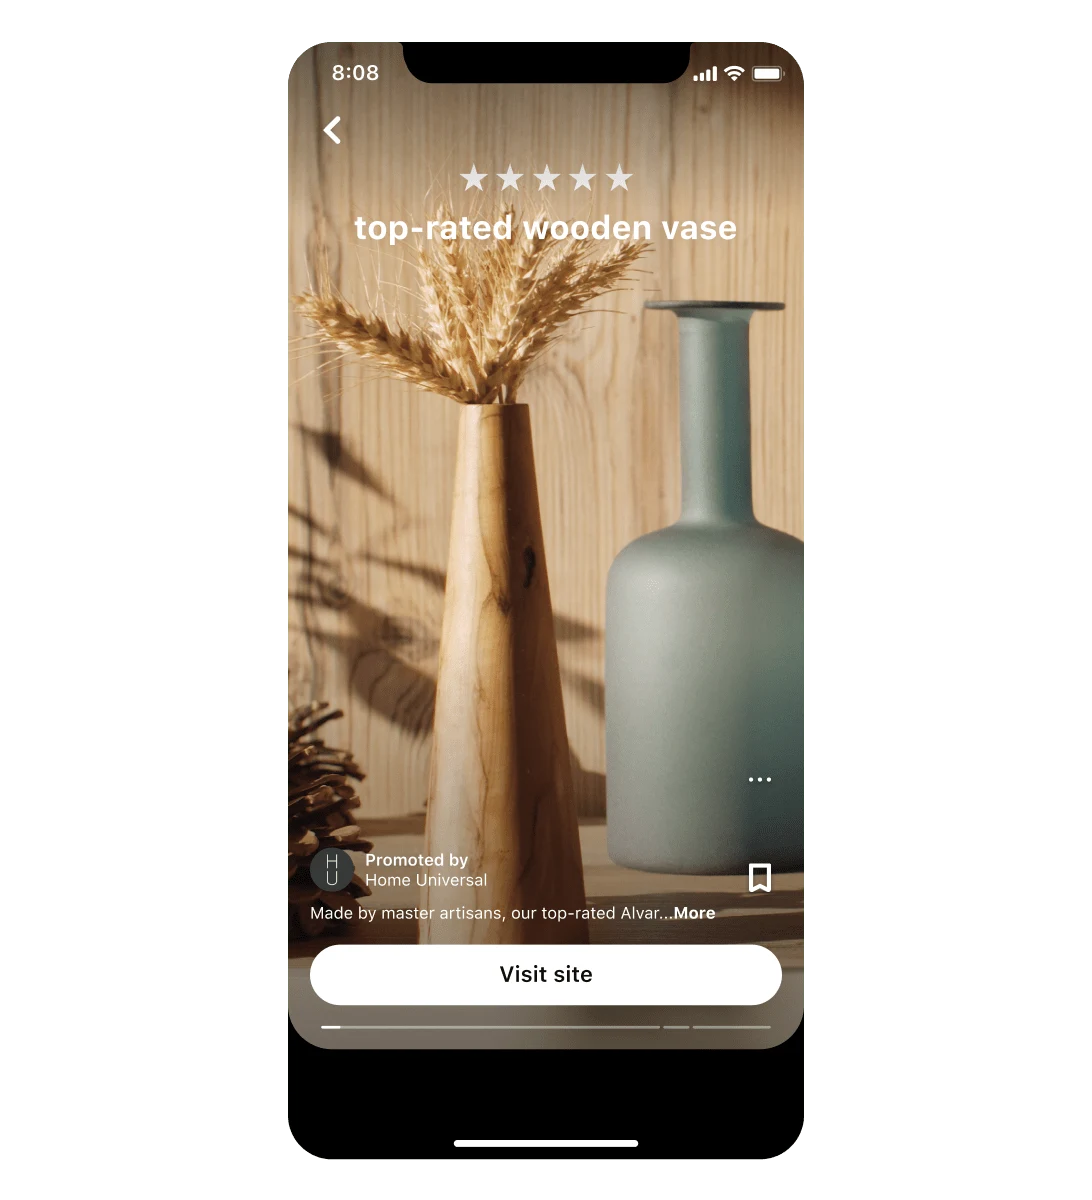 Idea ad by Home Universal for their top-rated wooden vase, shown on a mobile screen. A five-star rating for the product is shown at the top.